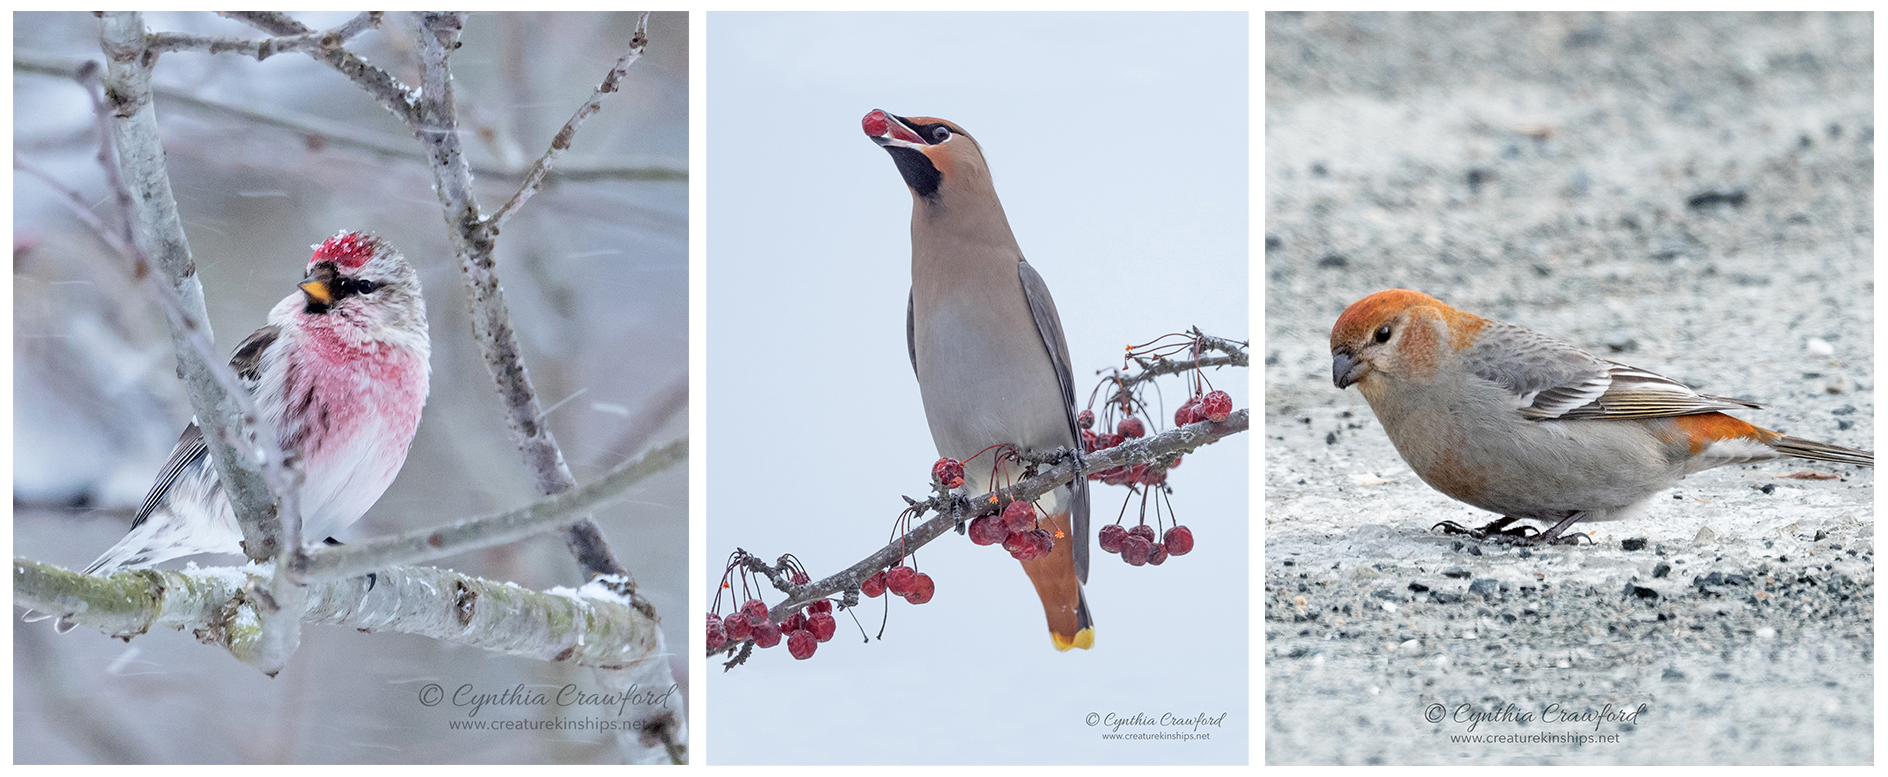 This trio of avian winter visitors from the far north delighted many Norwich birders during 2019. From left: Common Redpoll, Bohemian Waxwing, and Pine Grosbeak. © Cynthia Crawford 